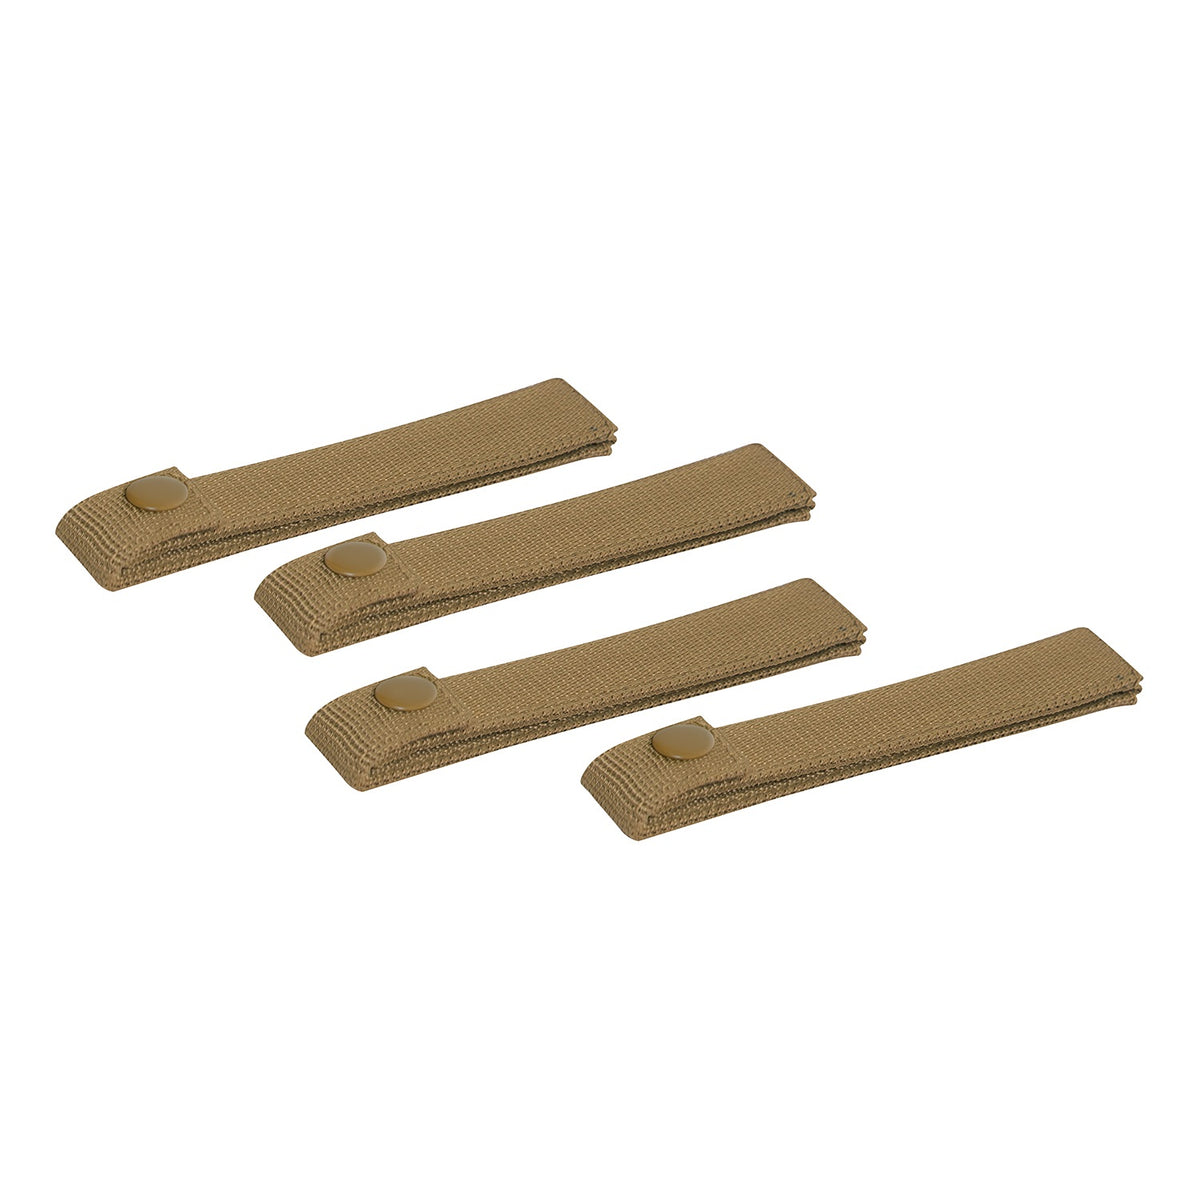 Rothco MOLLE Replacement Straps - 4 Pack Coyote Brown